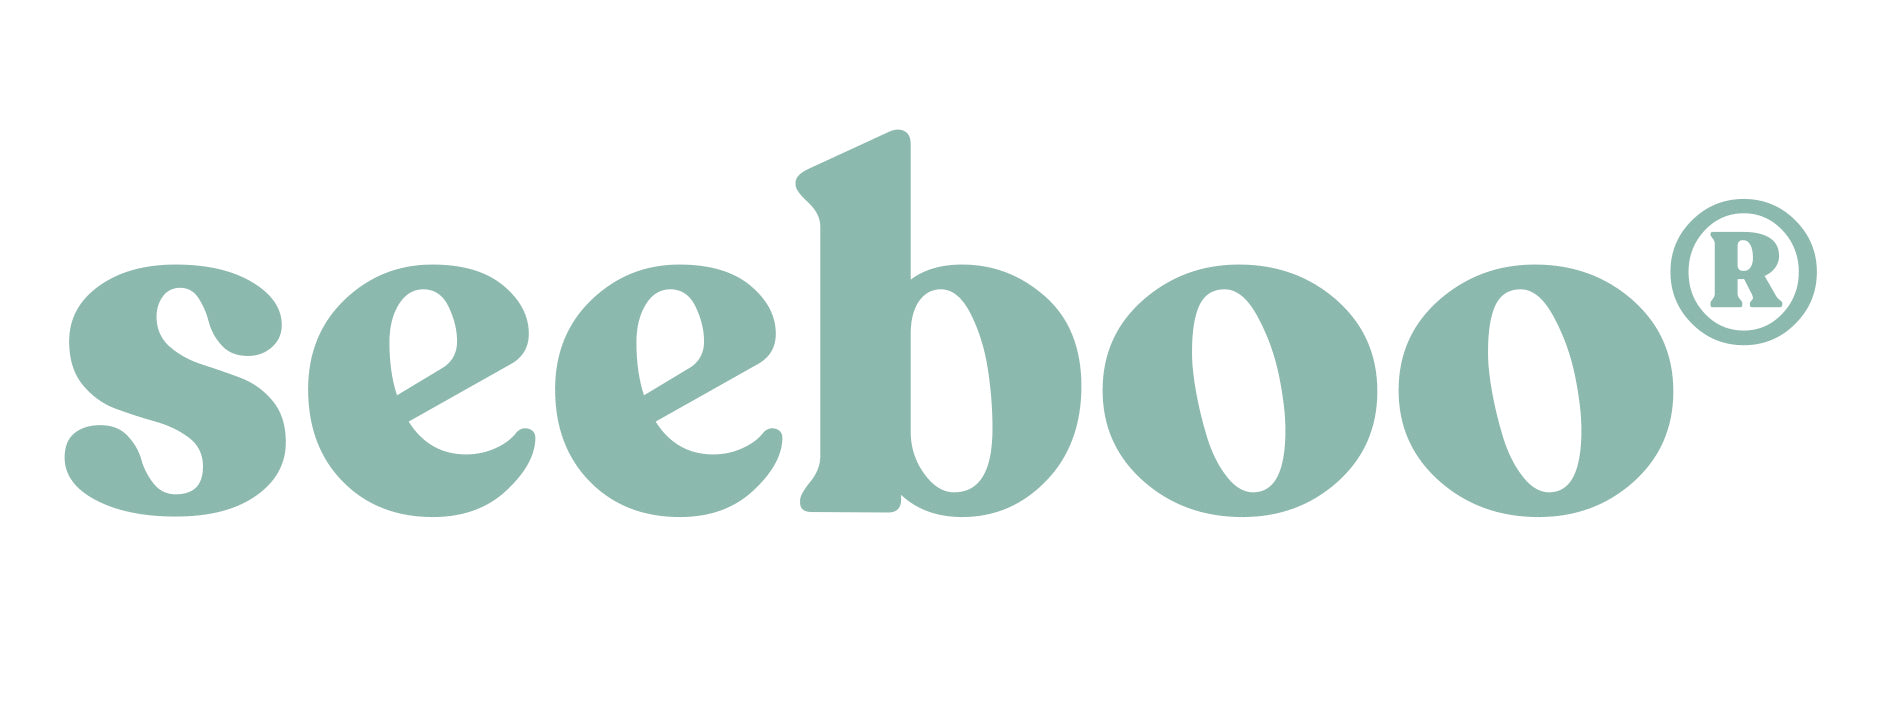 seeboo | Self-Care Products | GOOD FOR THE MIND, GOOD FOR THE PLANET